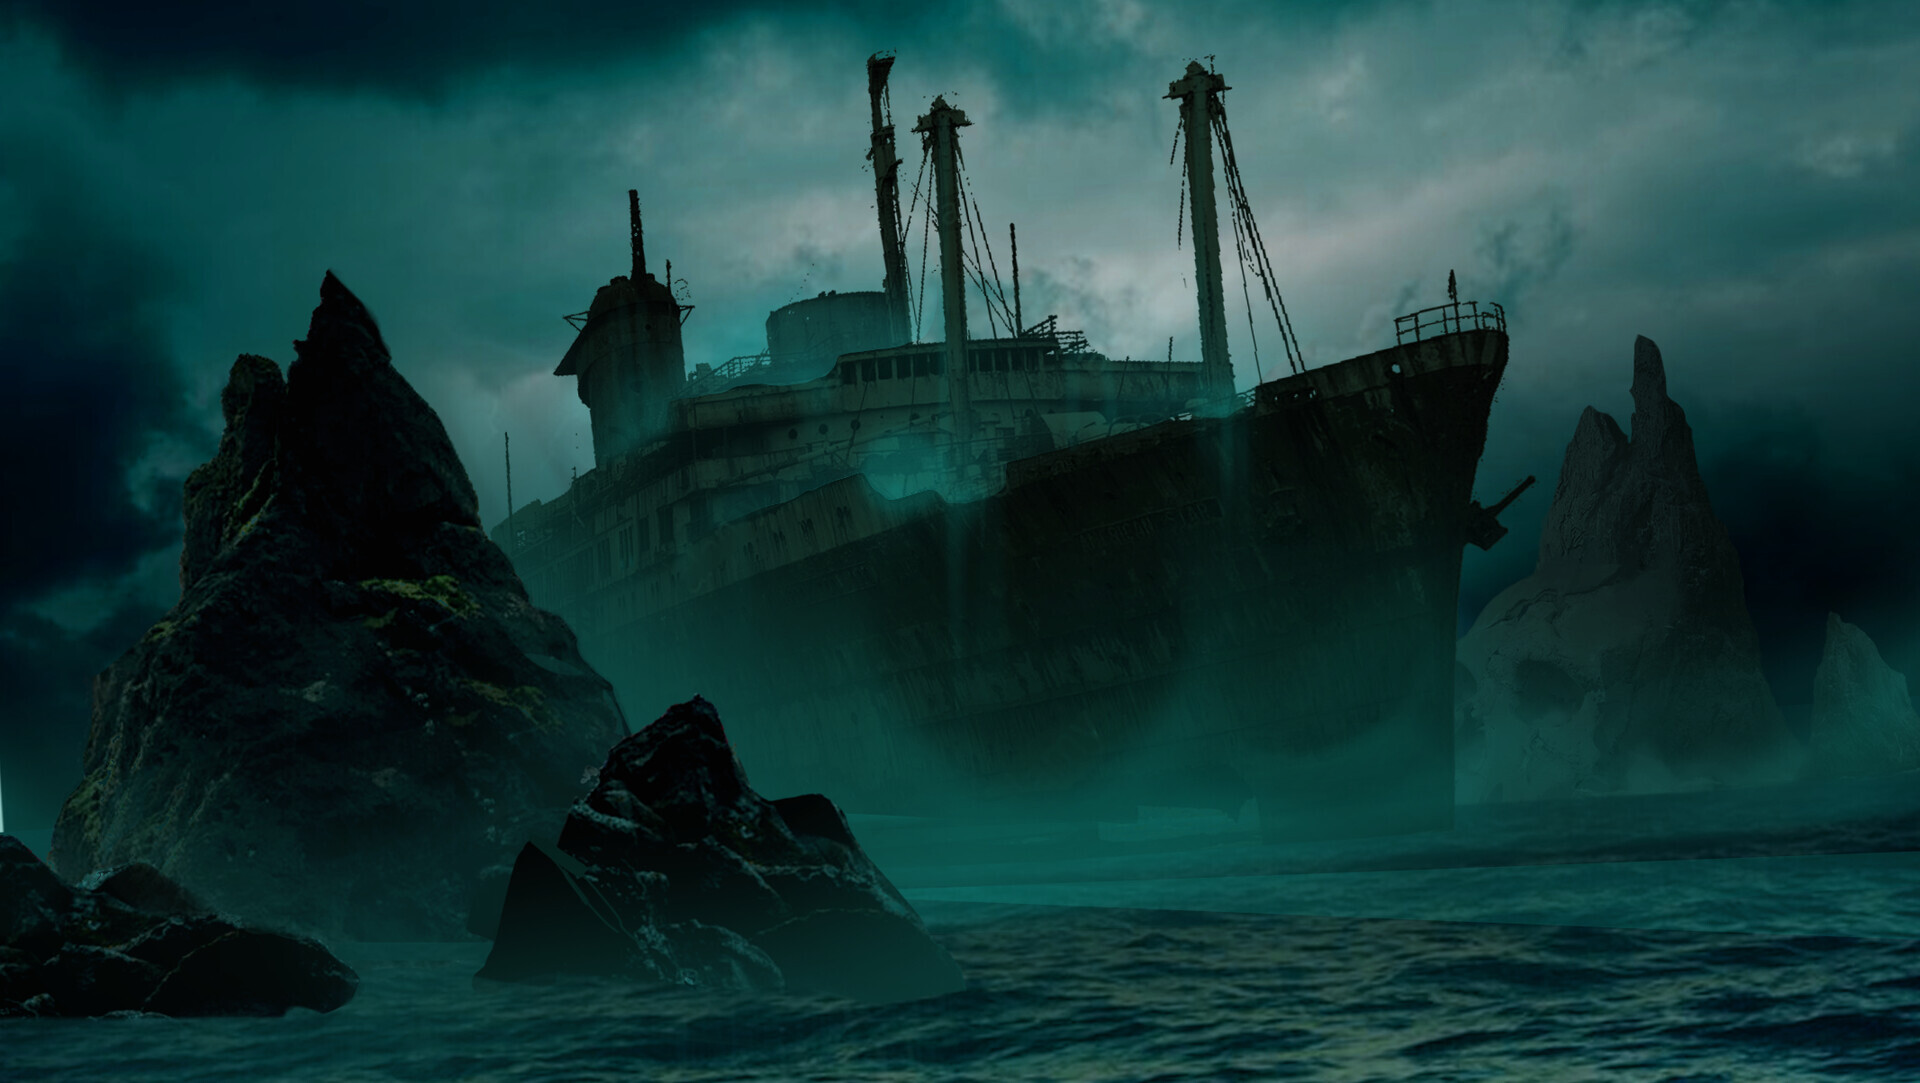 Ghost Ship: A shipwreck at the coast of the ocean, The front part of a commercial vessel. 1920x1090 HD Wallpaper.